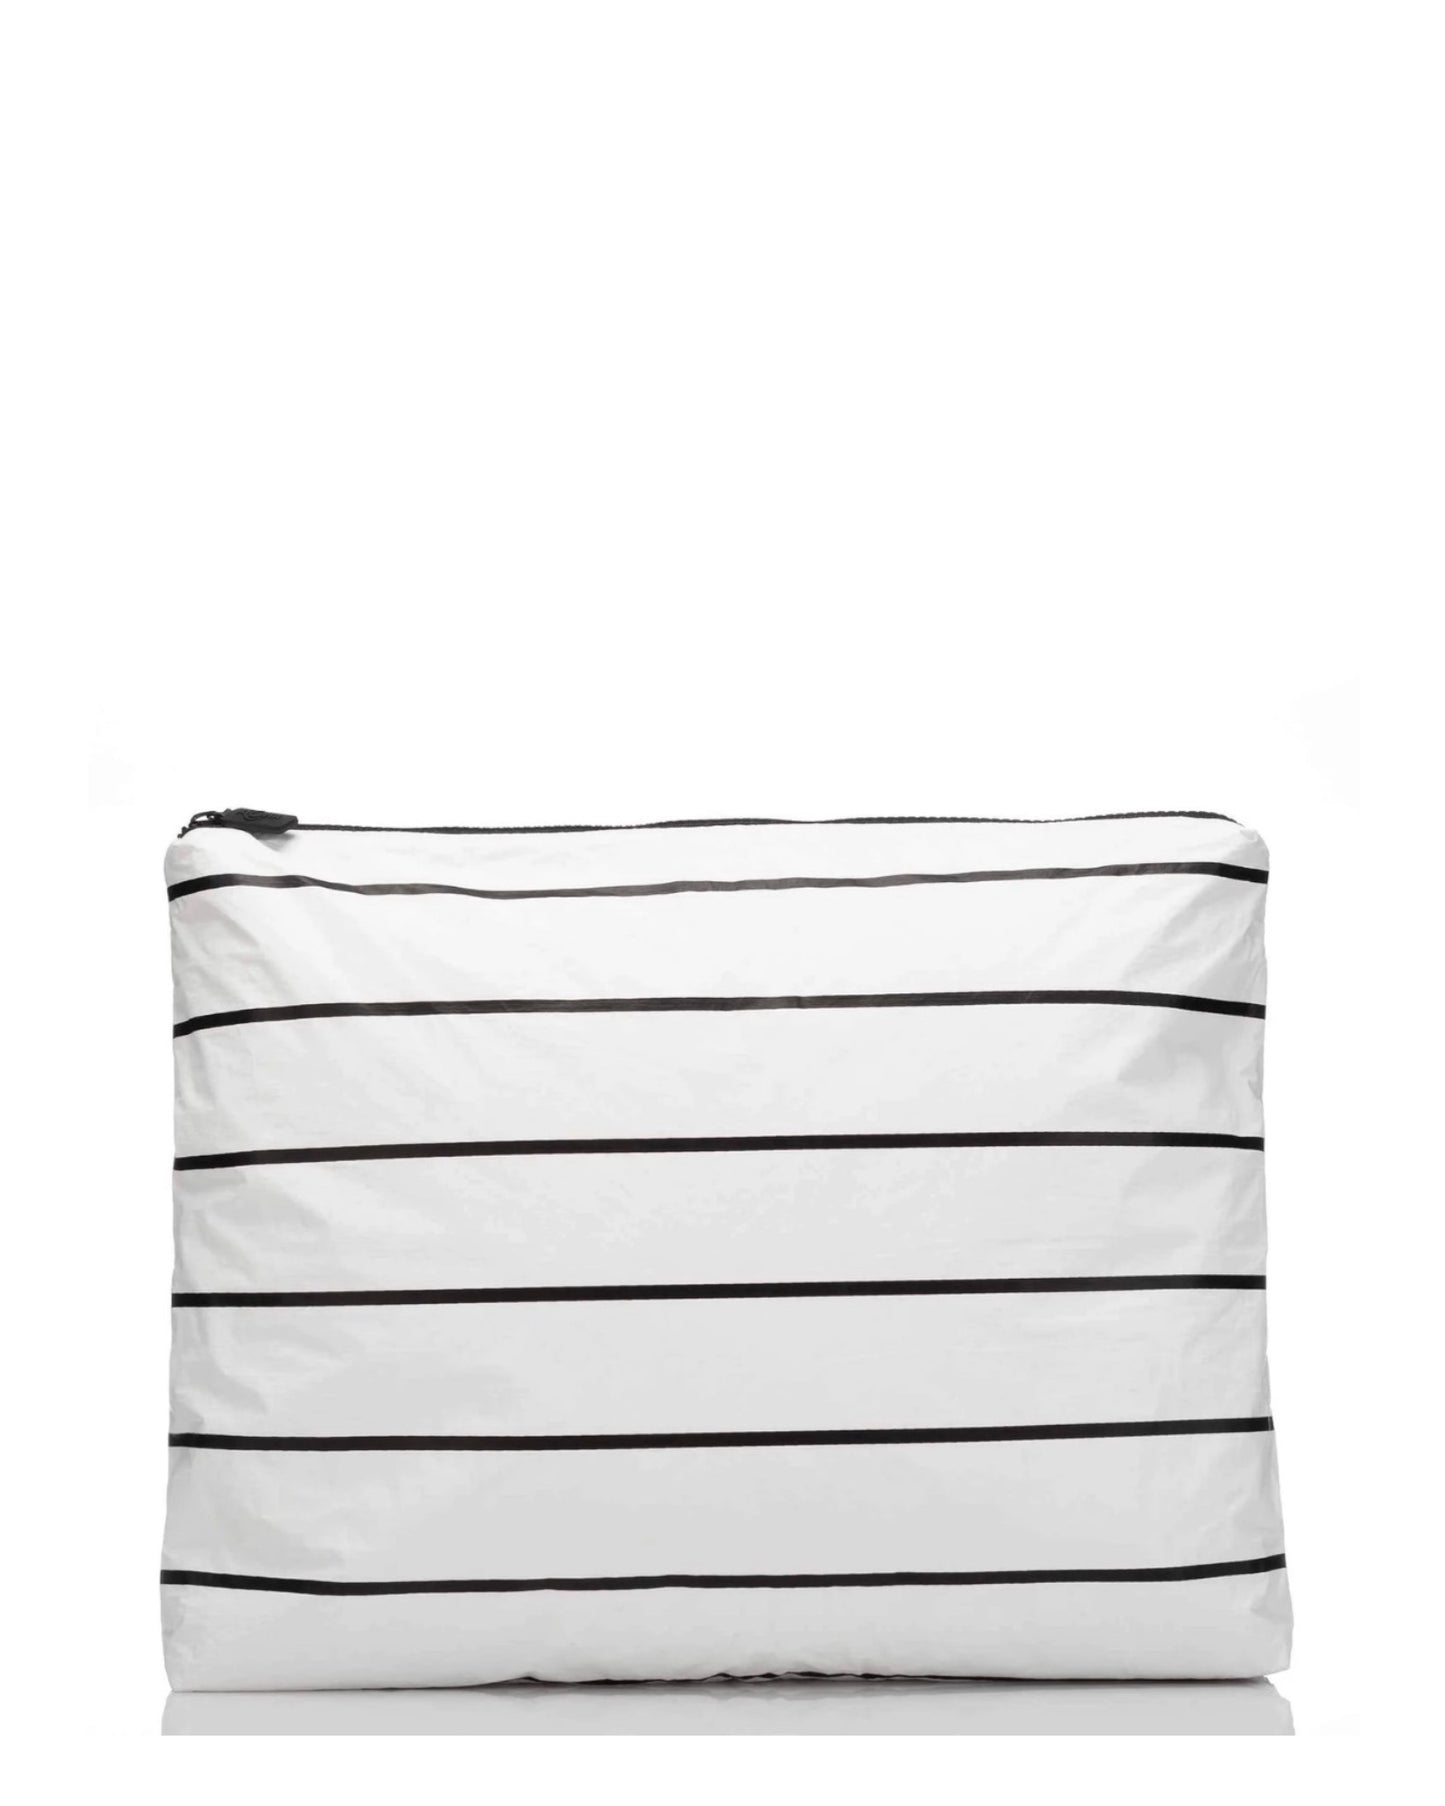 Aloha Collection Max Pouch Pinstripe Black on White